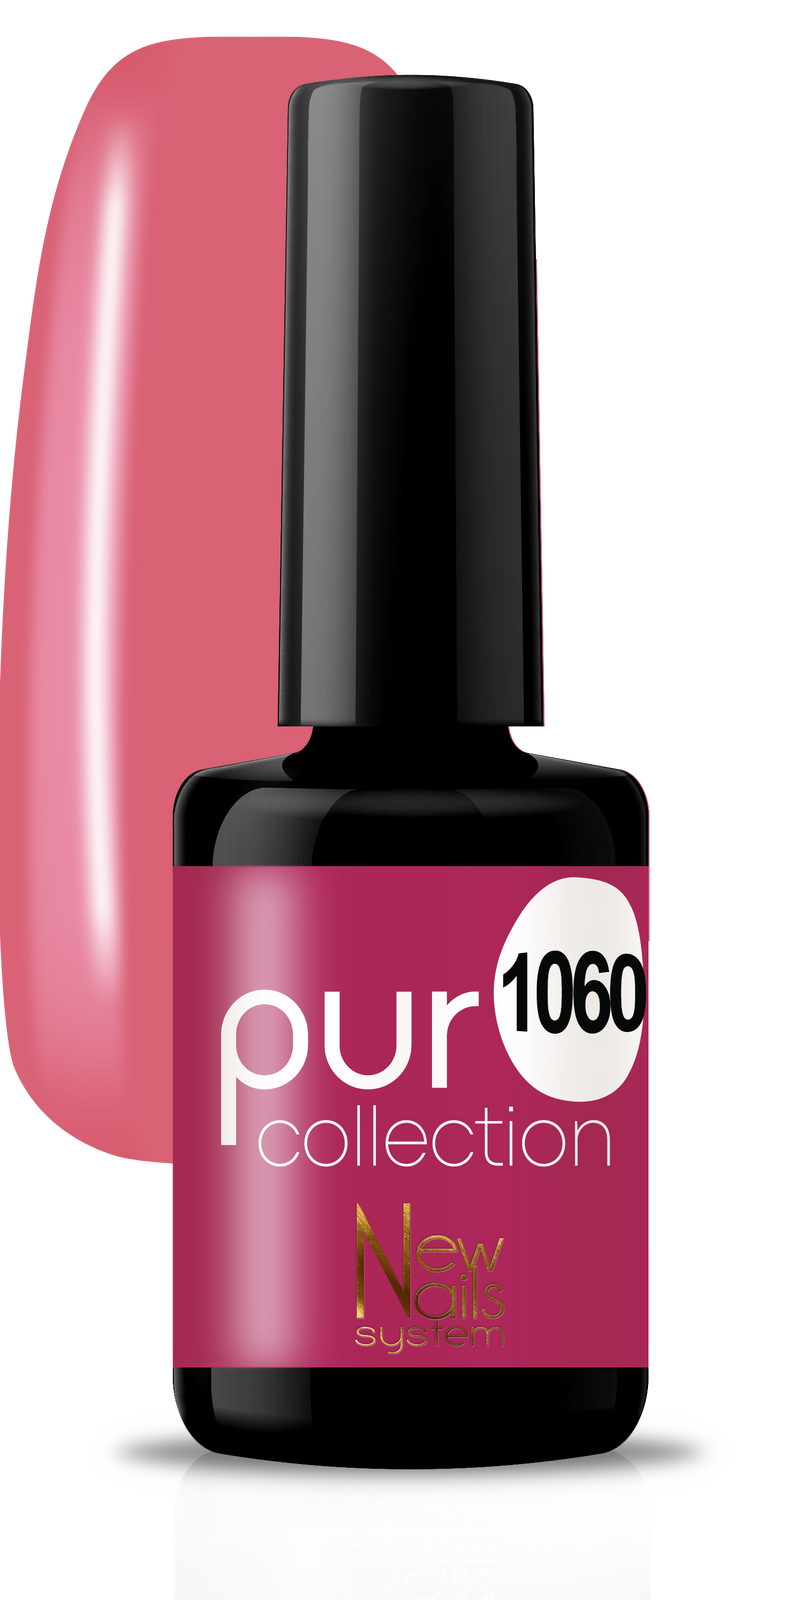 Puro collection Scent of Roses 1060 polish gel color 5ml